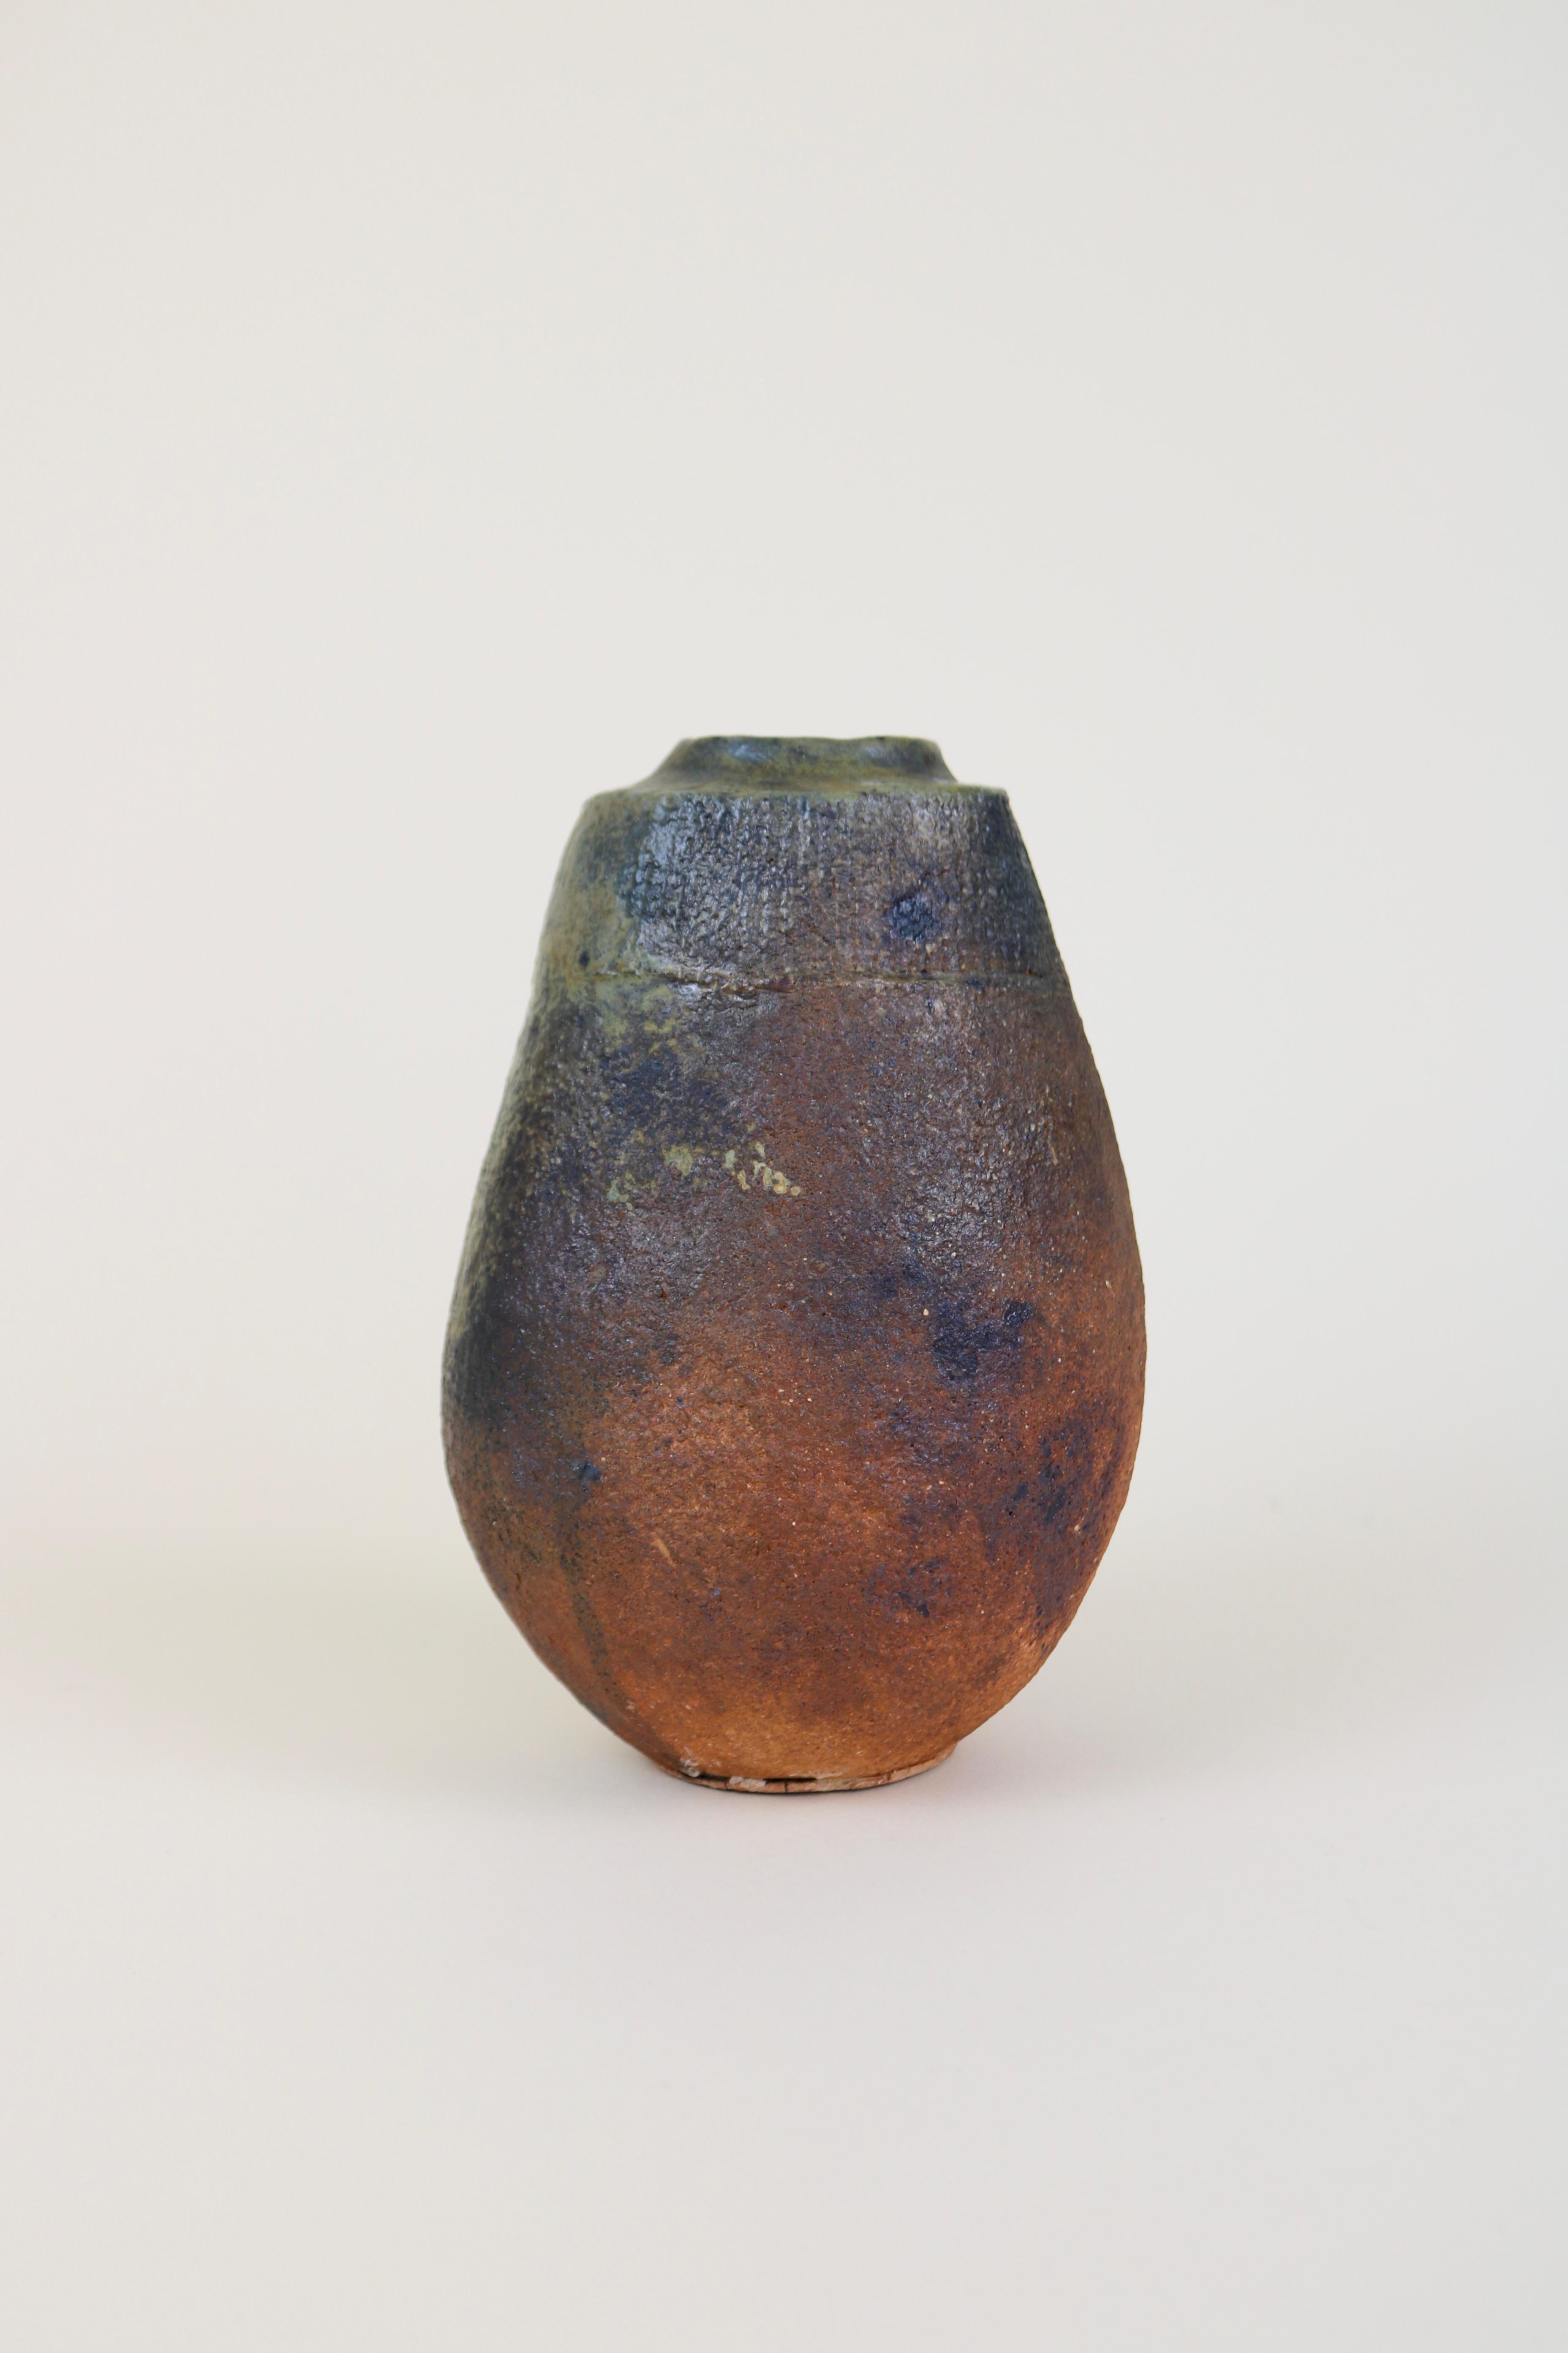 A ceramic sculptural vase by La Borne potter Gérard Brossard, circa 1980.
A chunky and heavy stoneware vase with an asymmetric form and a rough handmade feel.

Brossard was a student of Jean and Jacqueline Lerat in the 1970s.
In perfect